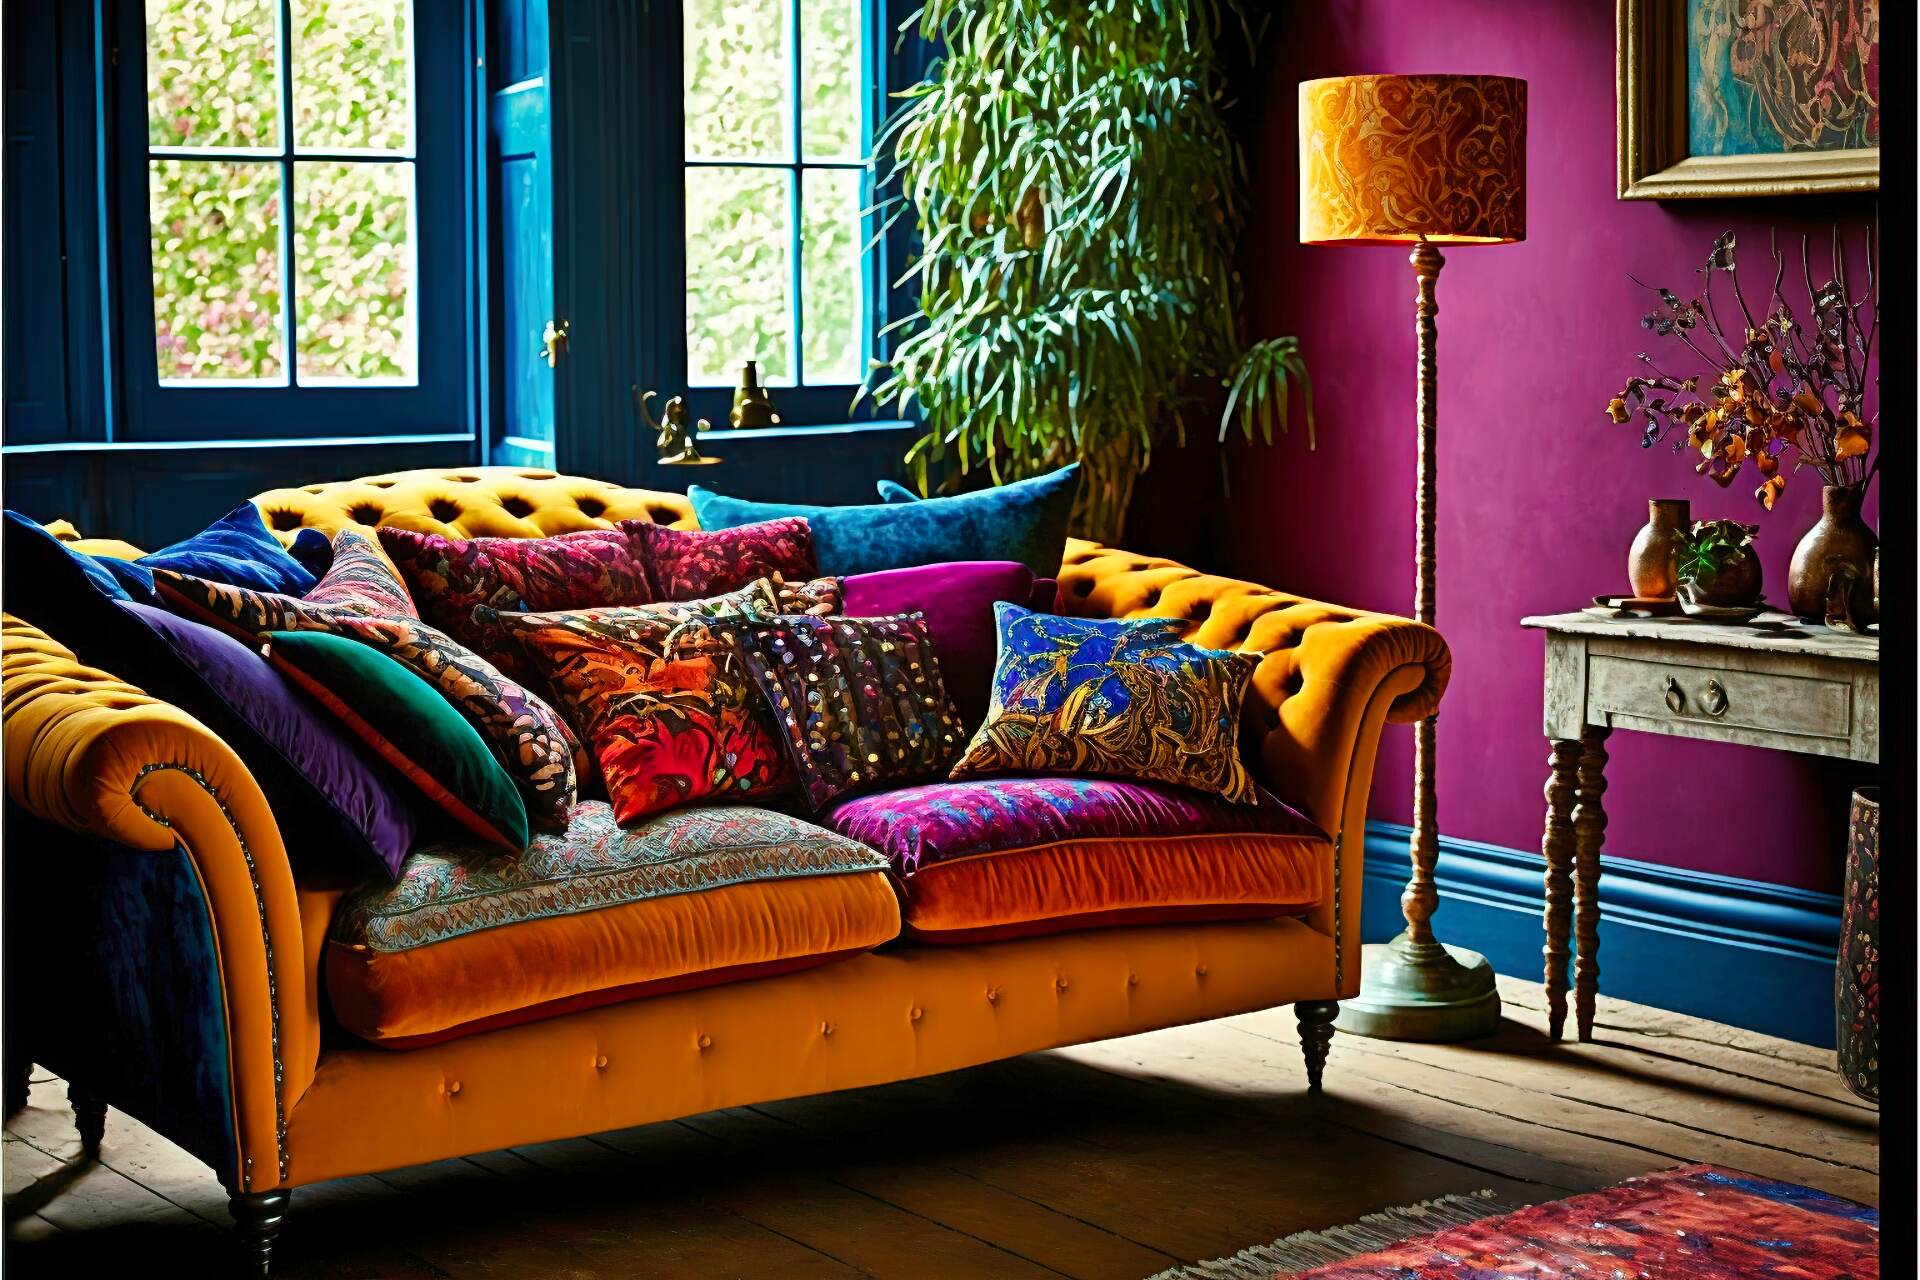 This Bohemian Living Room Features A Vibrant Color Palette, With Deep Red And Purple Hues Accented By Pops Of Bright Yellow And Orange. A Plush Velvet Sofa Sits At The Center Of The Space, Surrounded By A Mix Of Patterned Throw Pillows And Woven Textiles. A Large Woven Tapestry Hangs Above The Fireplace, Adding A Touch Of Global Inspiration To The Design.